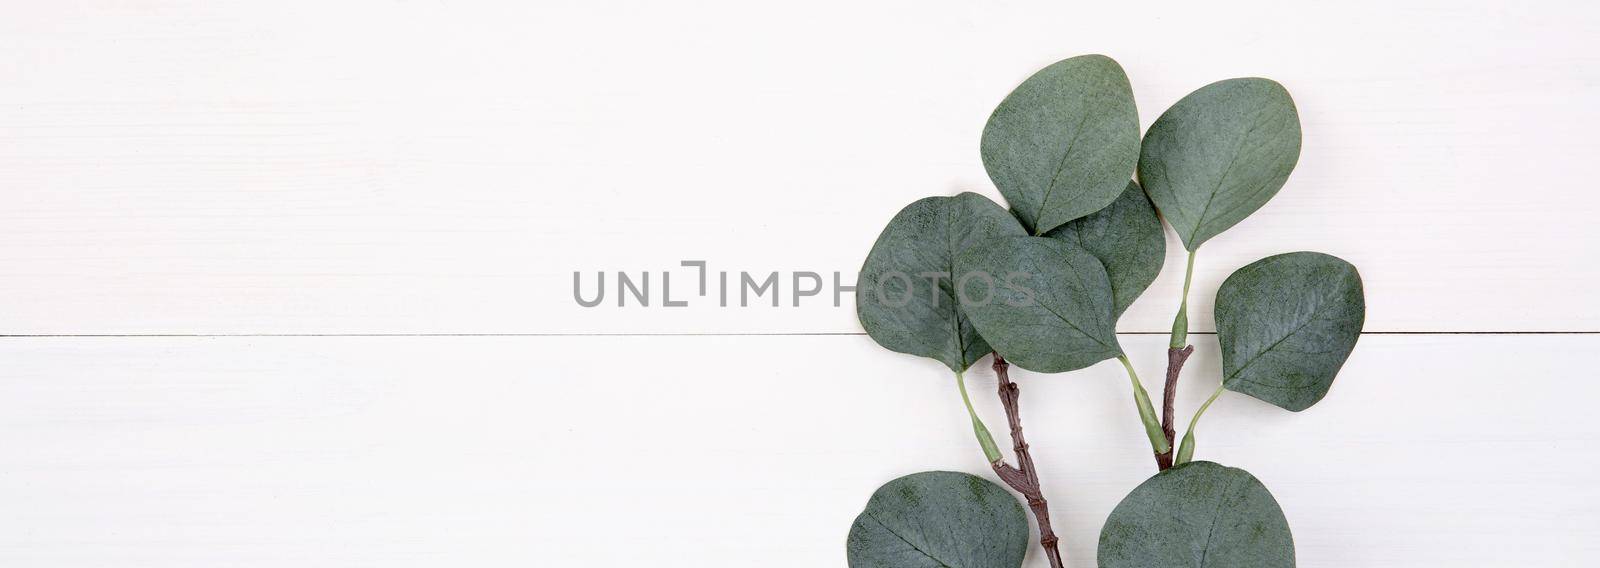 Leaf on wooden table, composition with top view, branch and leaves on wood desk with copy space, texture background, foliage tropical, nobody, flat lay, minimal concept, banner website.